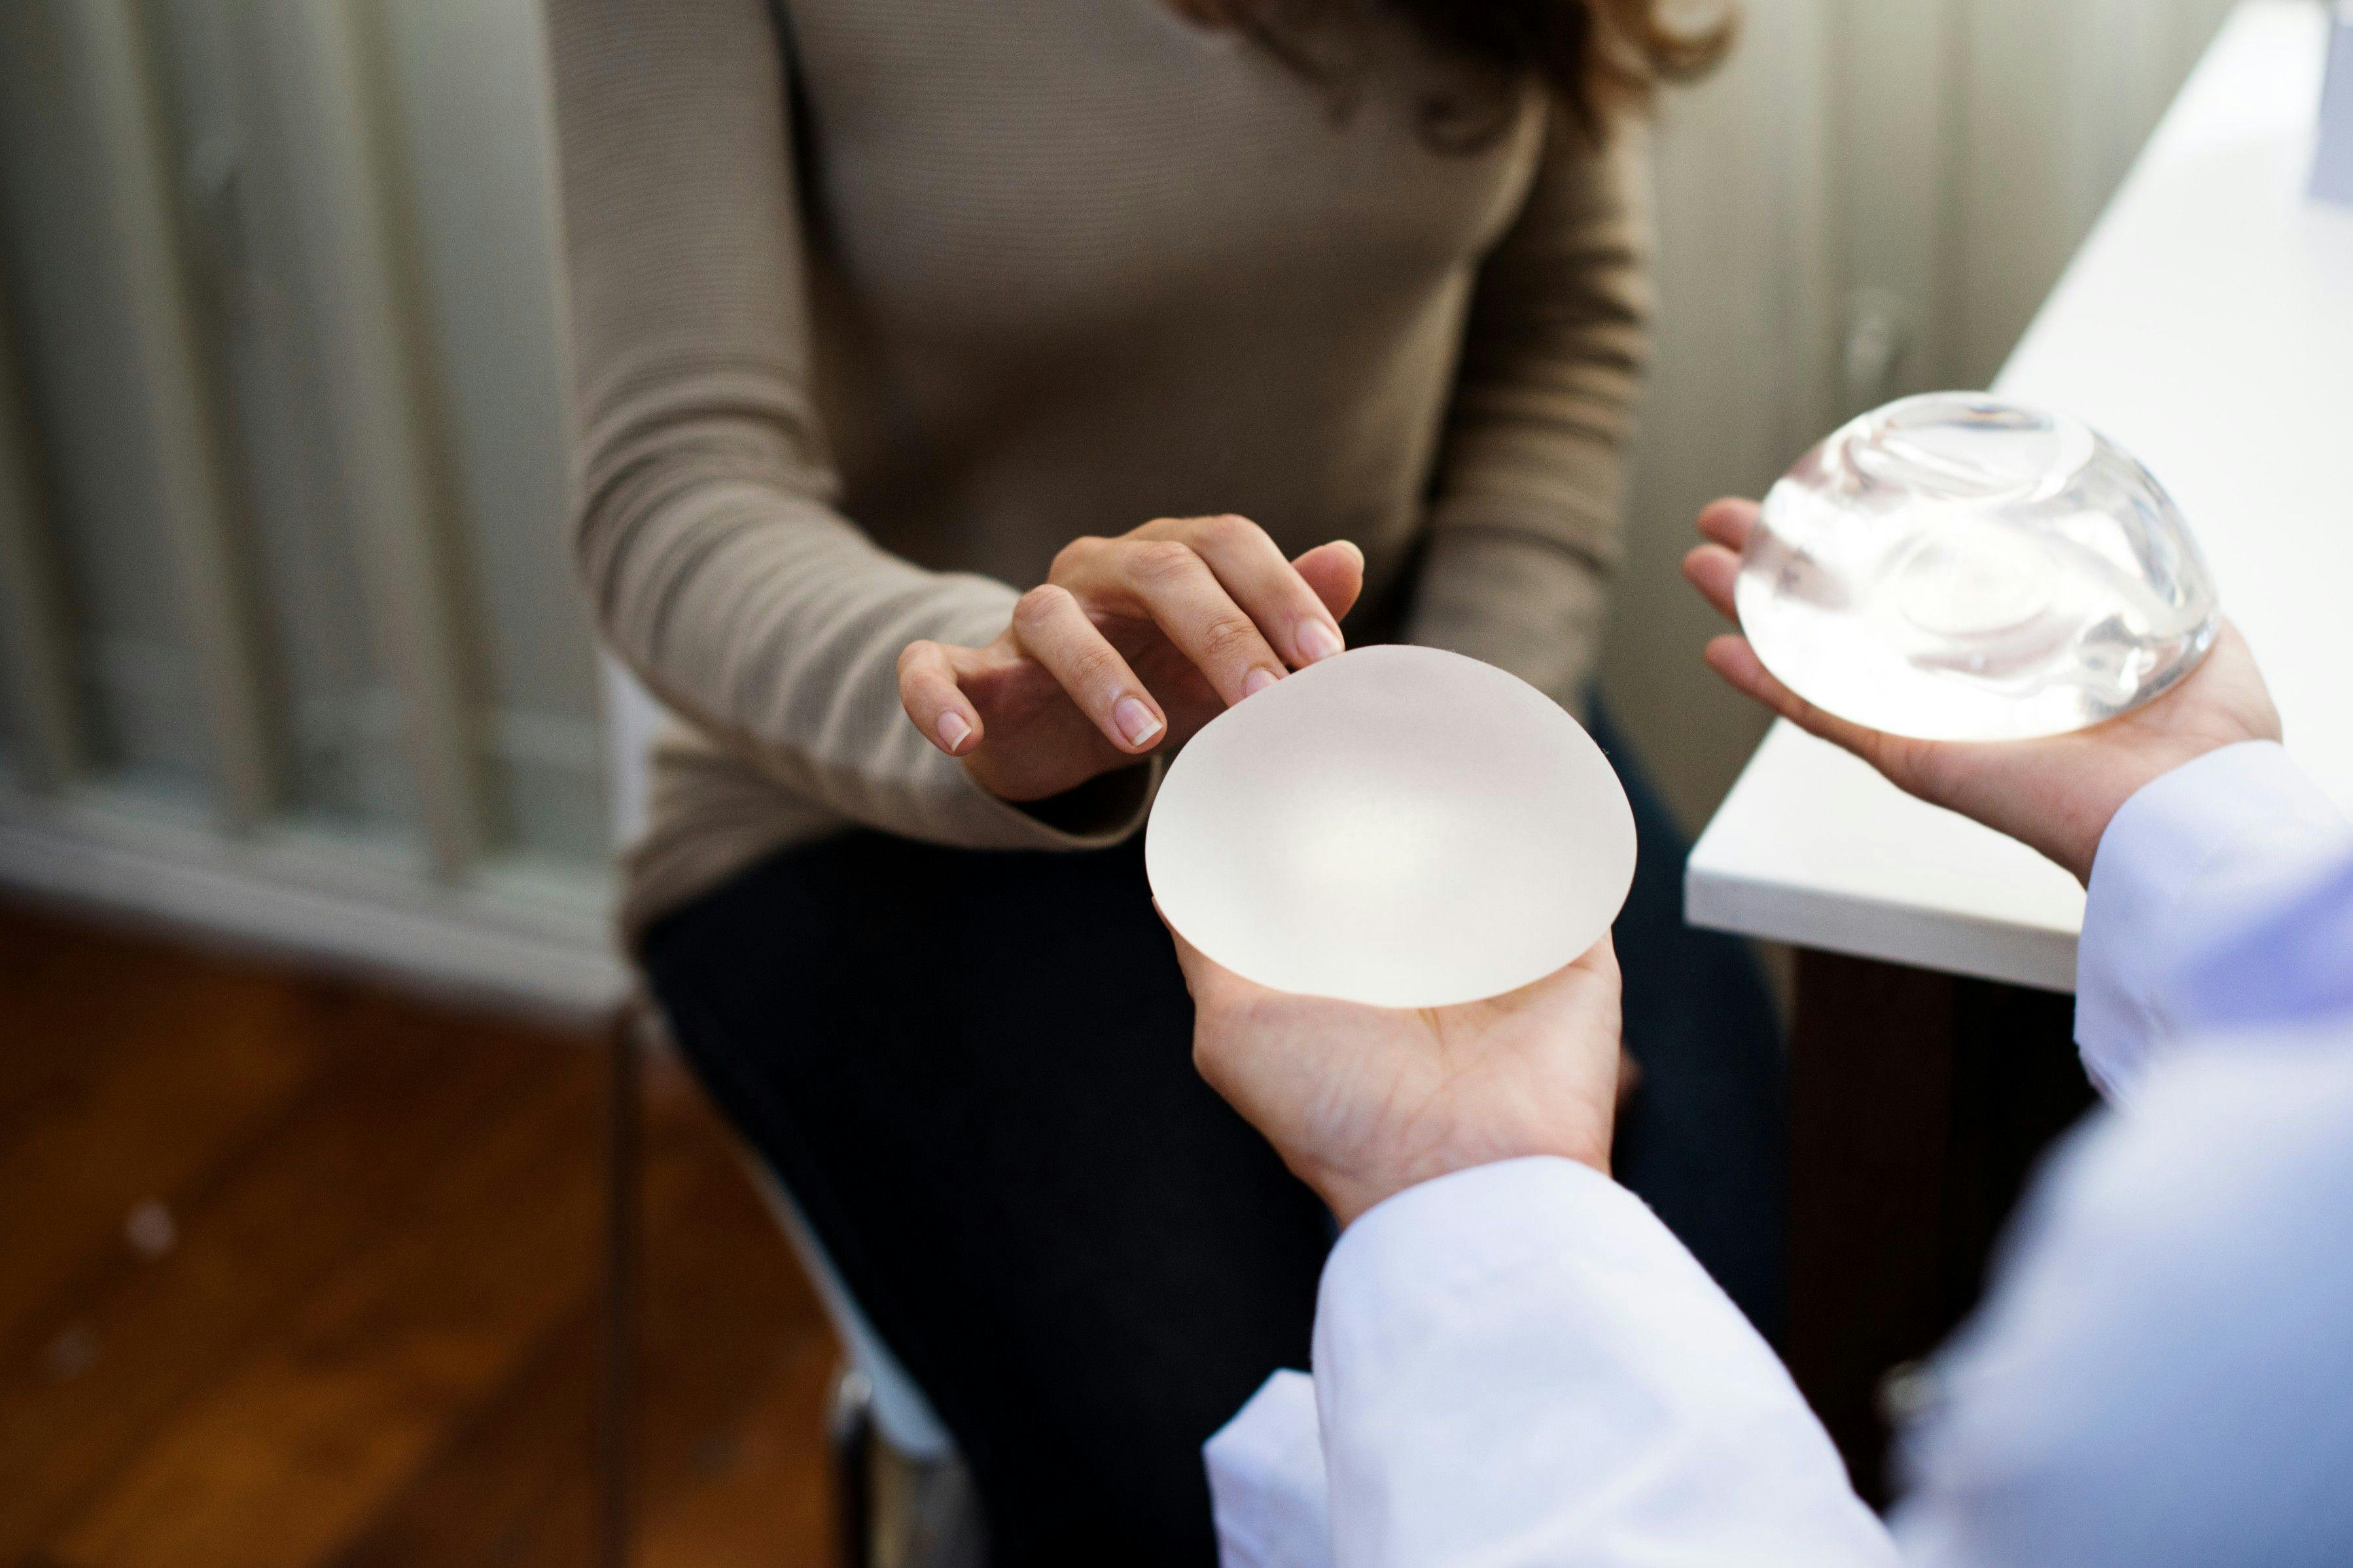 Allergan Biocell Breast Implant Lawsuits: A Guide for Attorneys